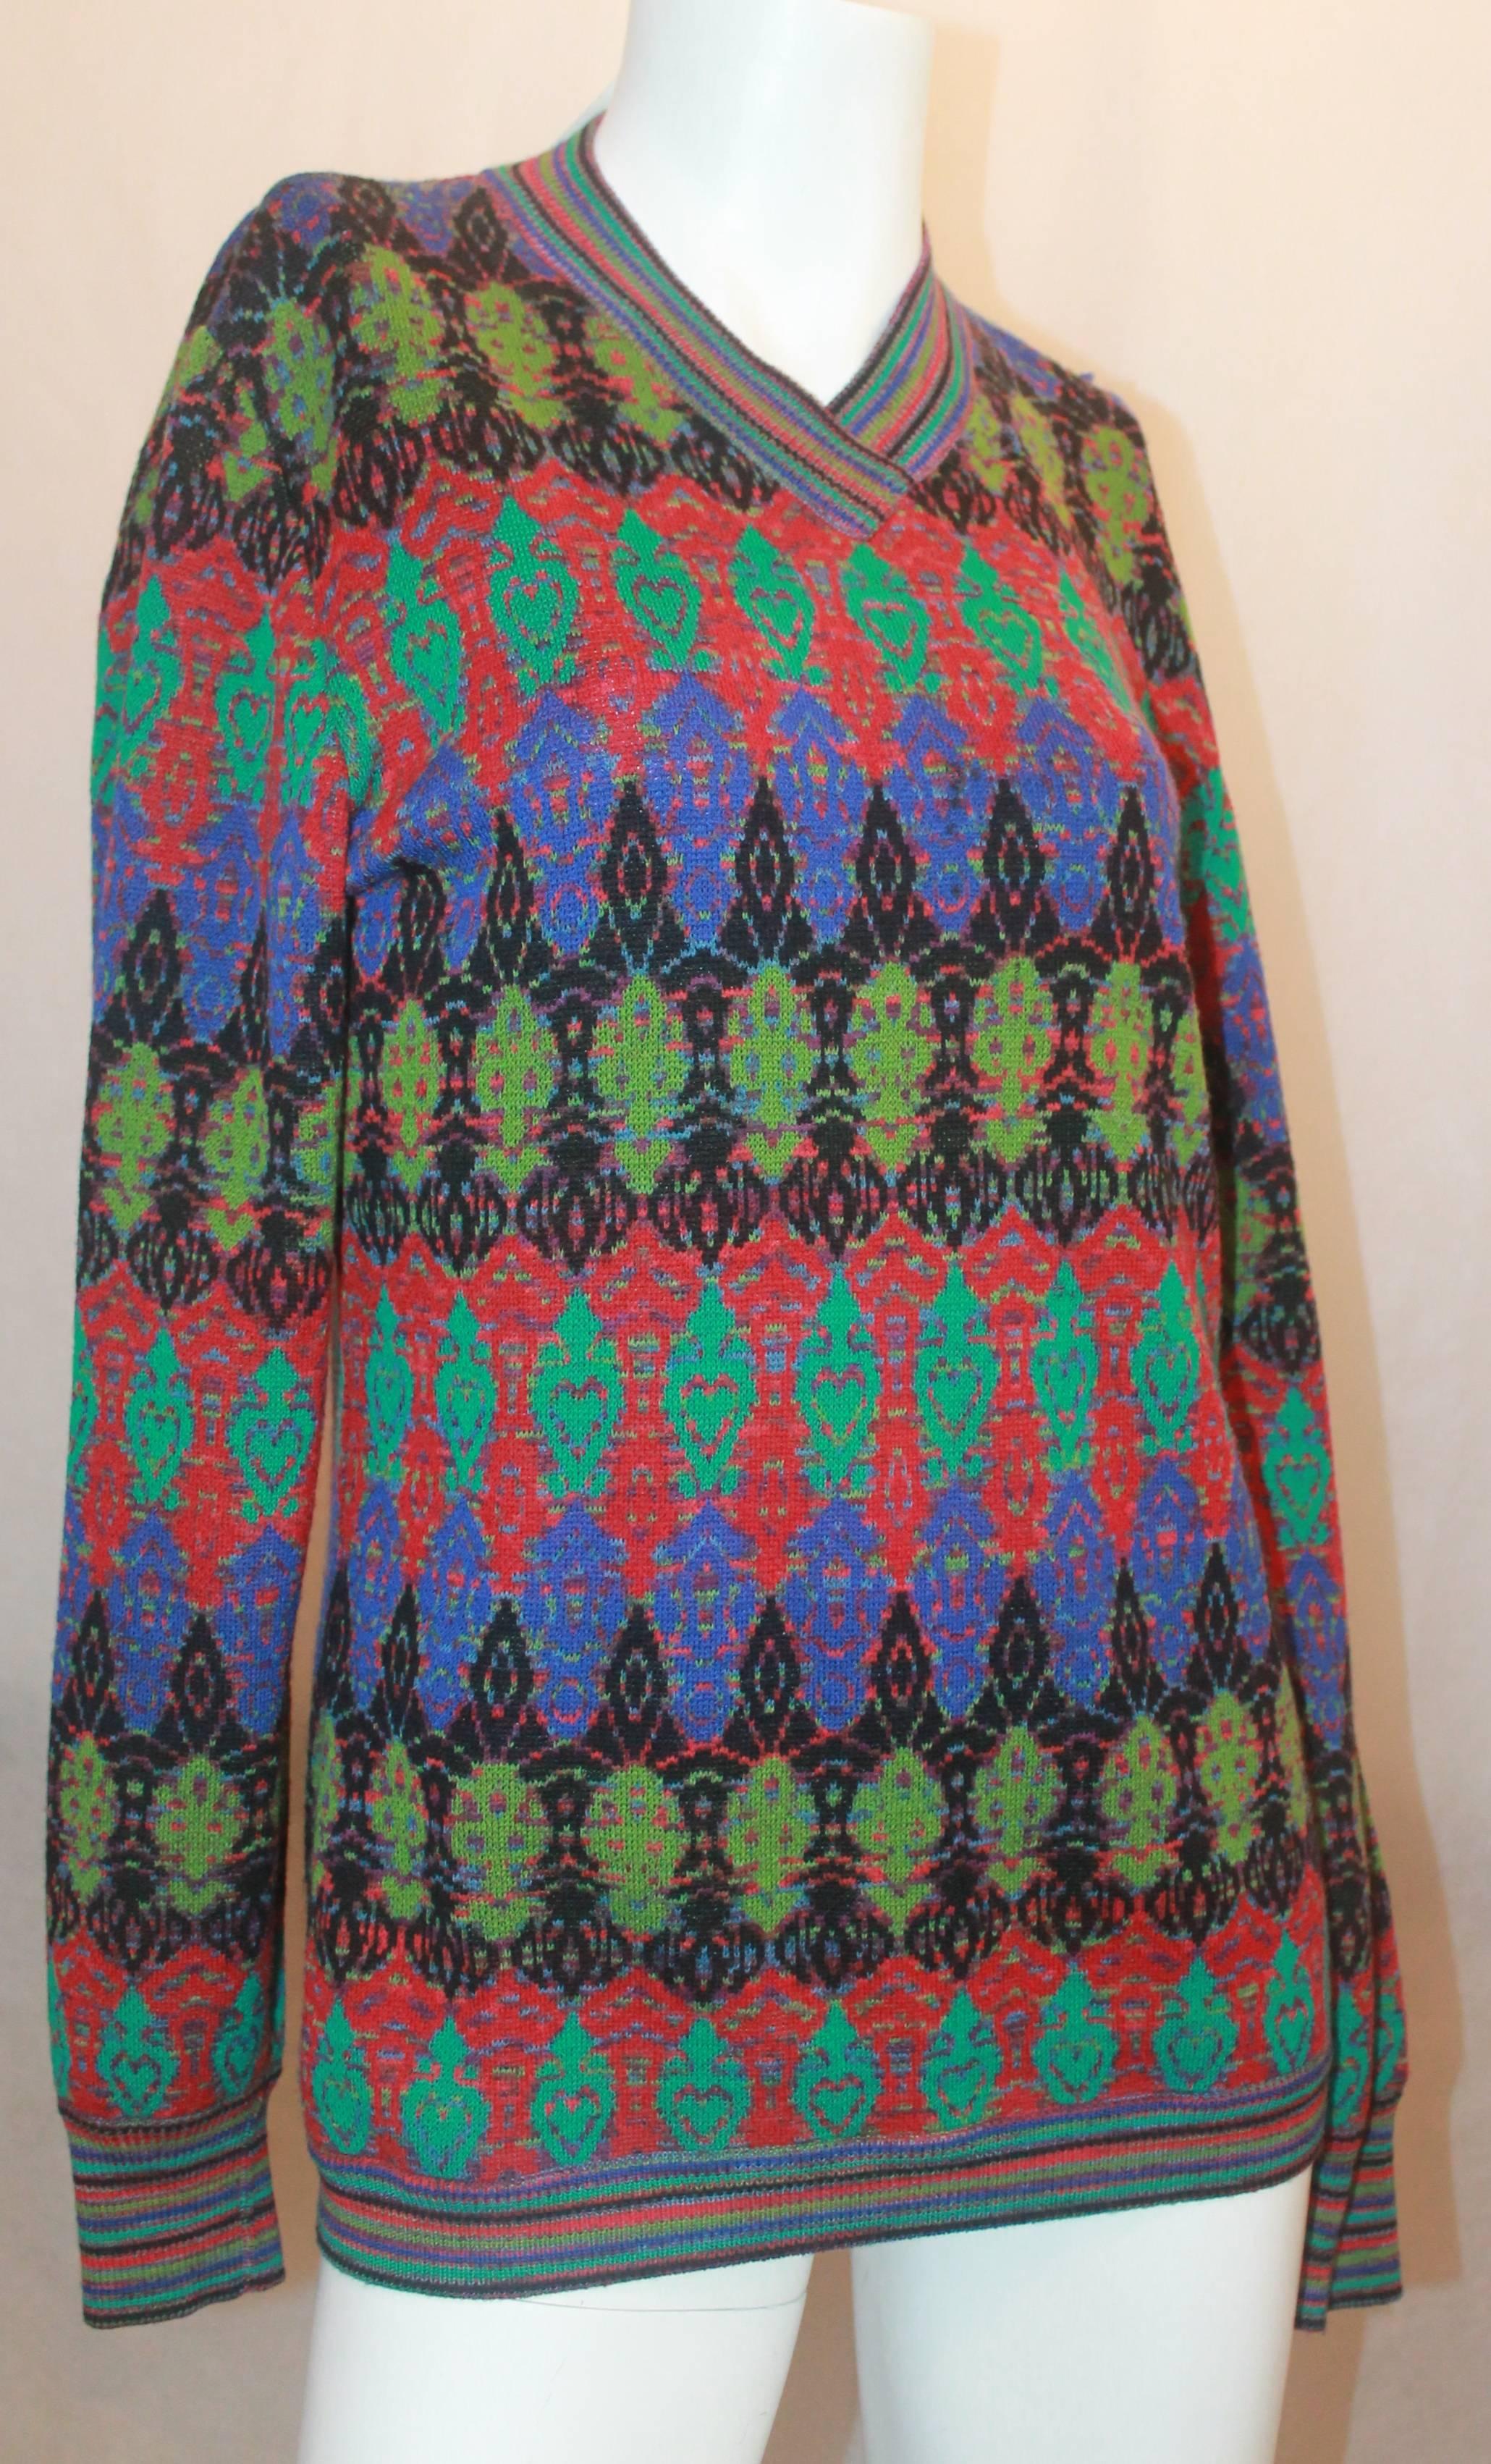 Missoni Vintage Multi Colored Sweater w/ an Artsy Geometric Pattern - M.  This lovely vintage Missoni sweater is in very good vintage condition with only two visible pulls.  It features a black, teal, green, purple, and red artsy geometric patterned